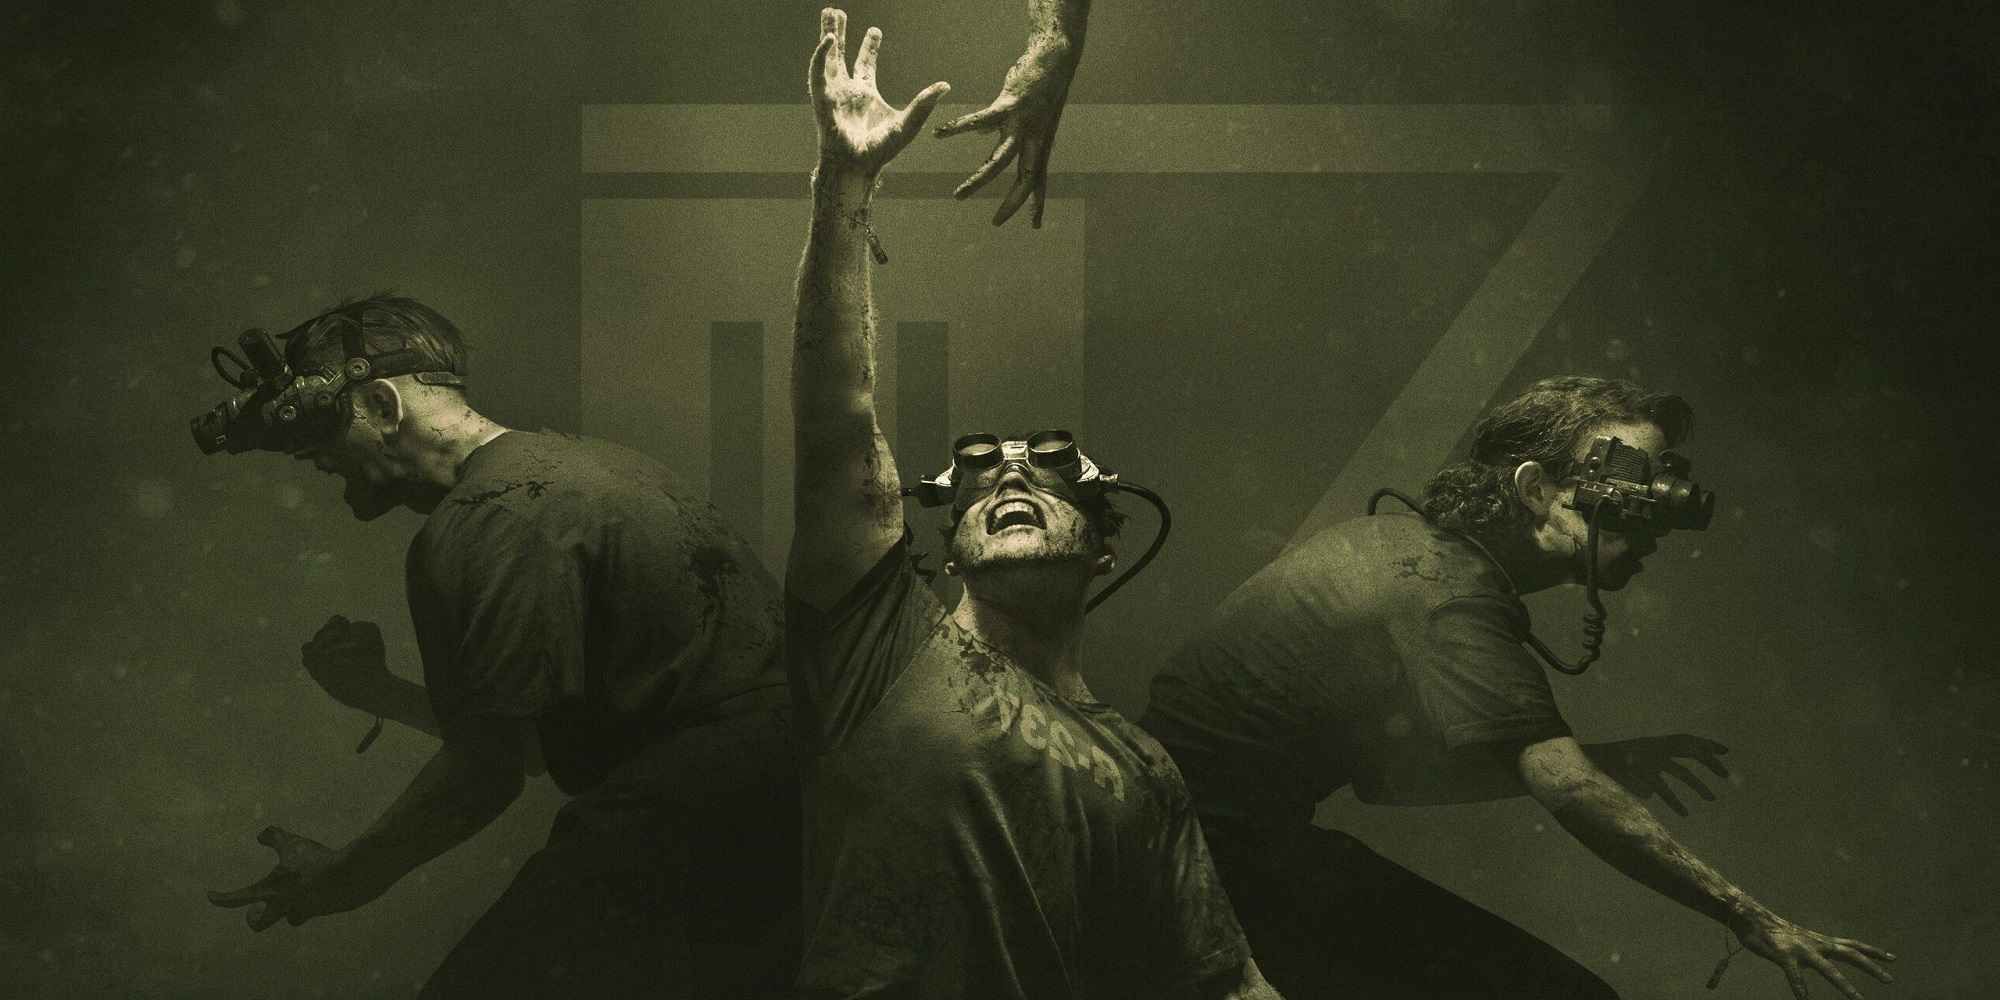 How The Outlast Trials Pays Homage to the Originals